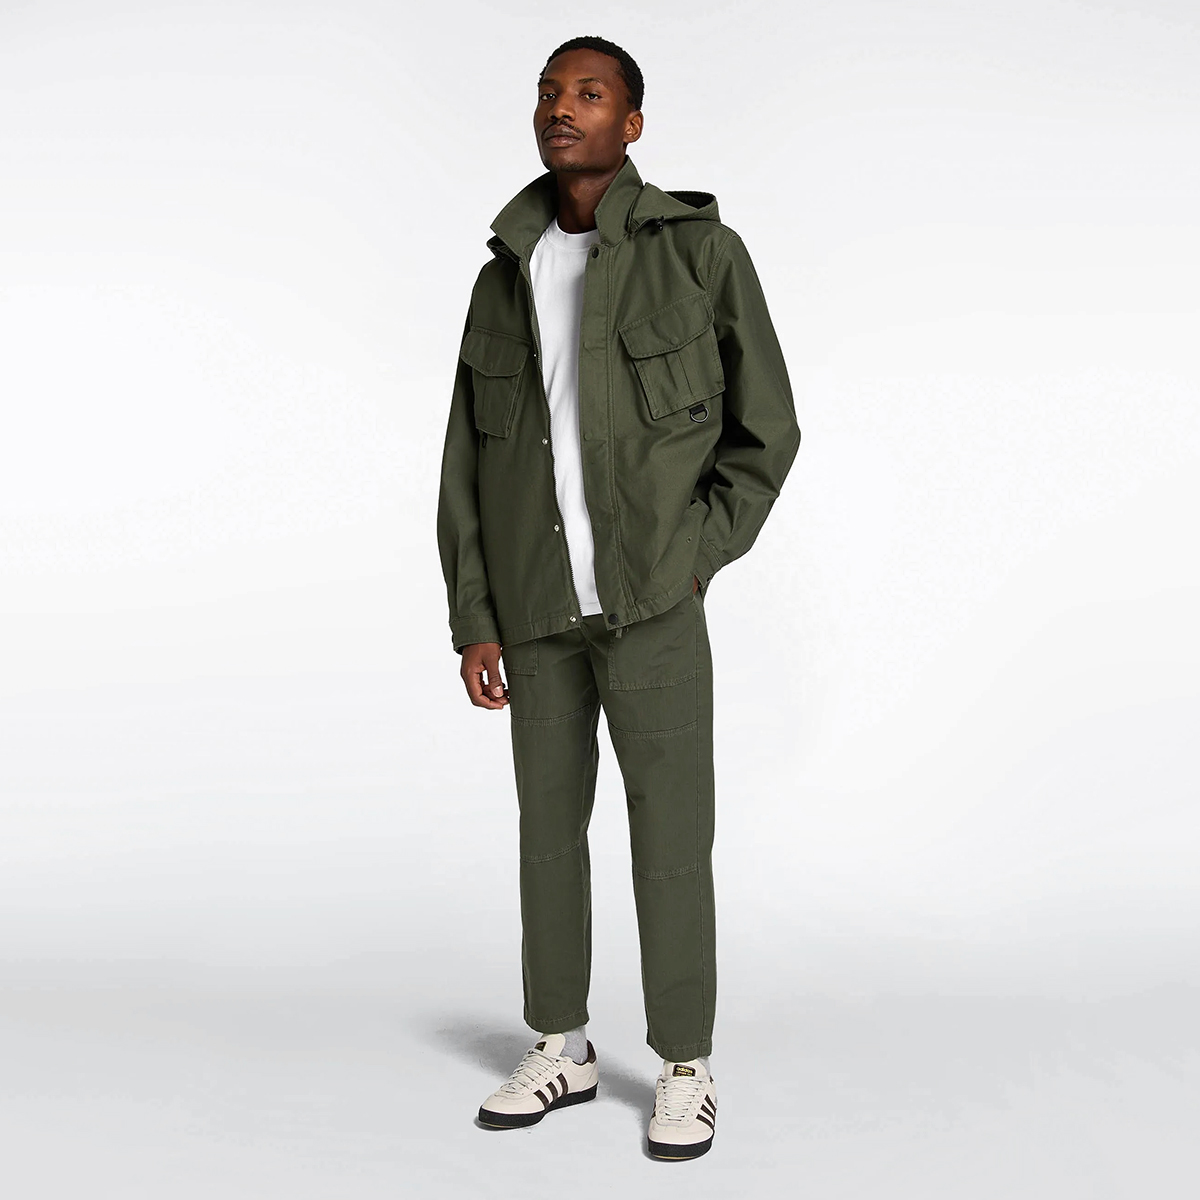 Strategy 2 Hooded Jacket - Ivy